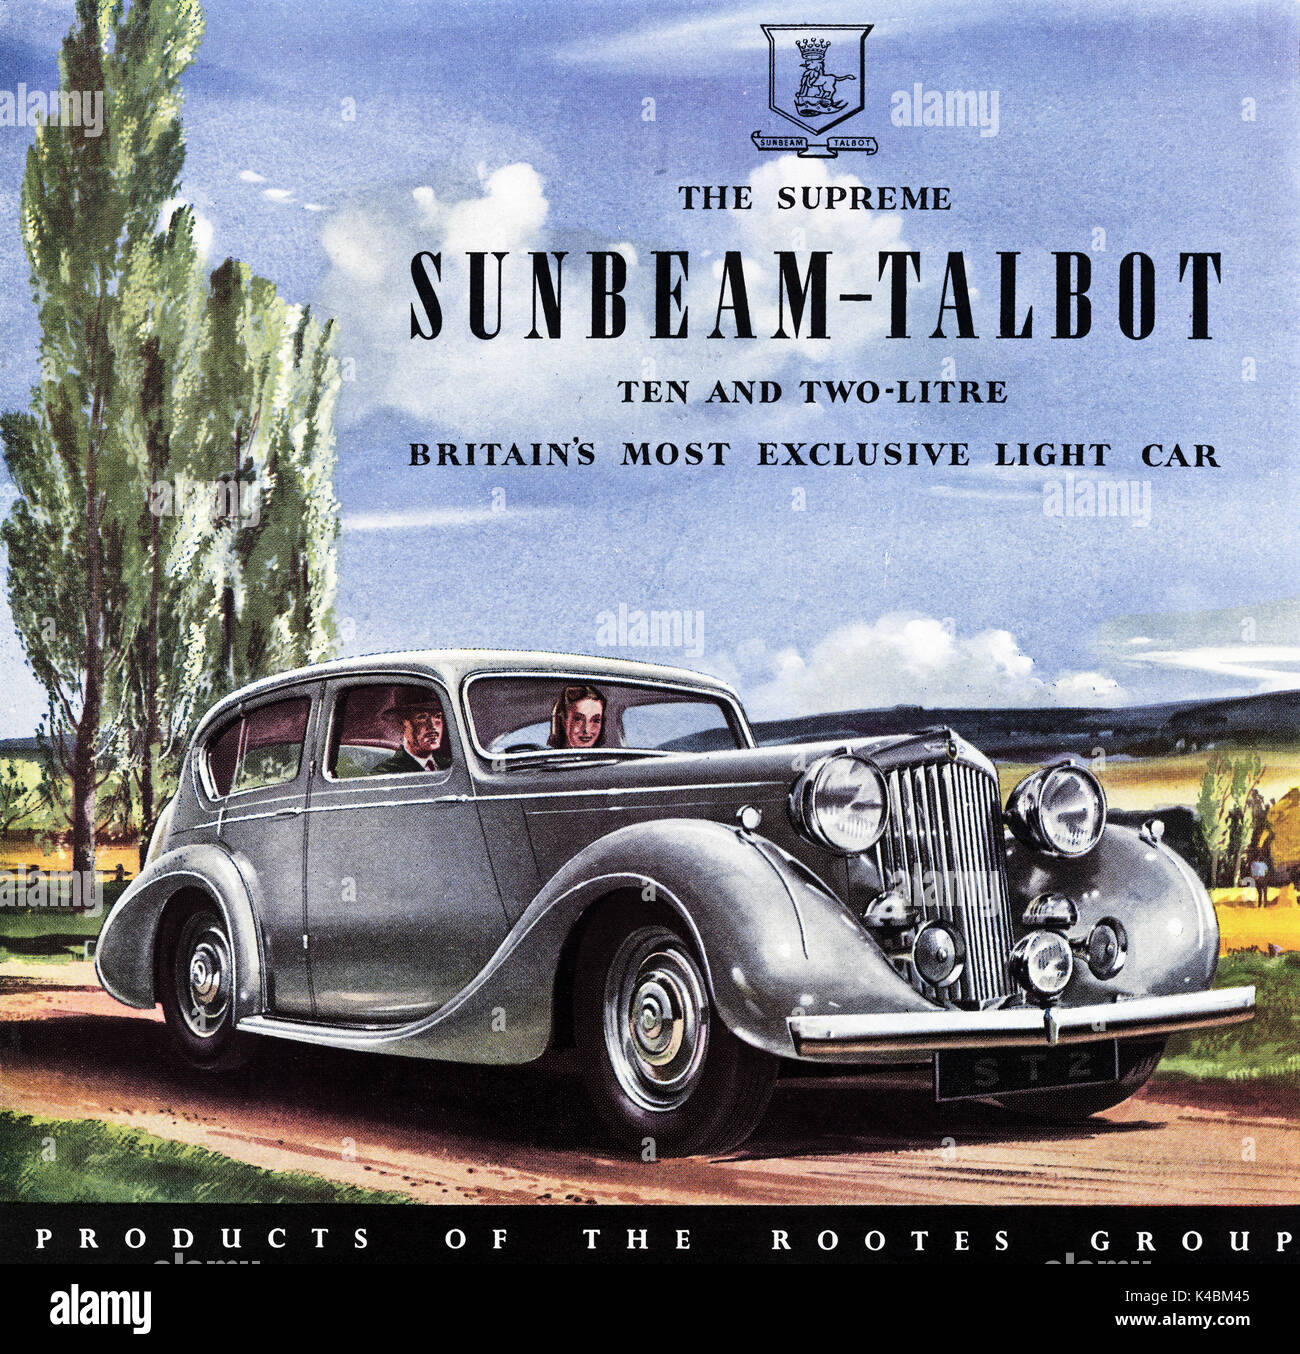 1940s old vintage original advert advertising Sunbeam-Talbot by The Rootes Group in magazine circa 1947 when supplies were still restricted under post-war rationing Stock Photo